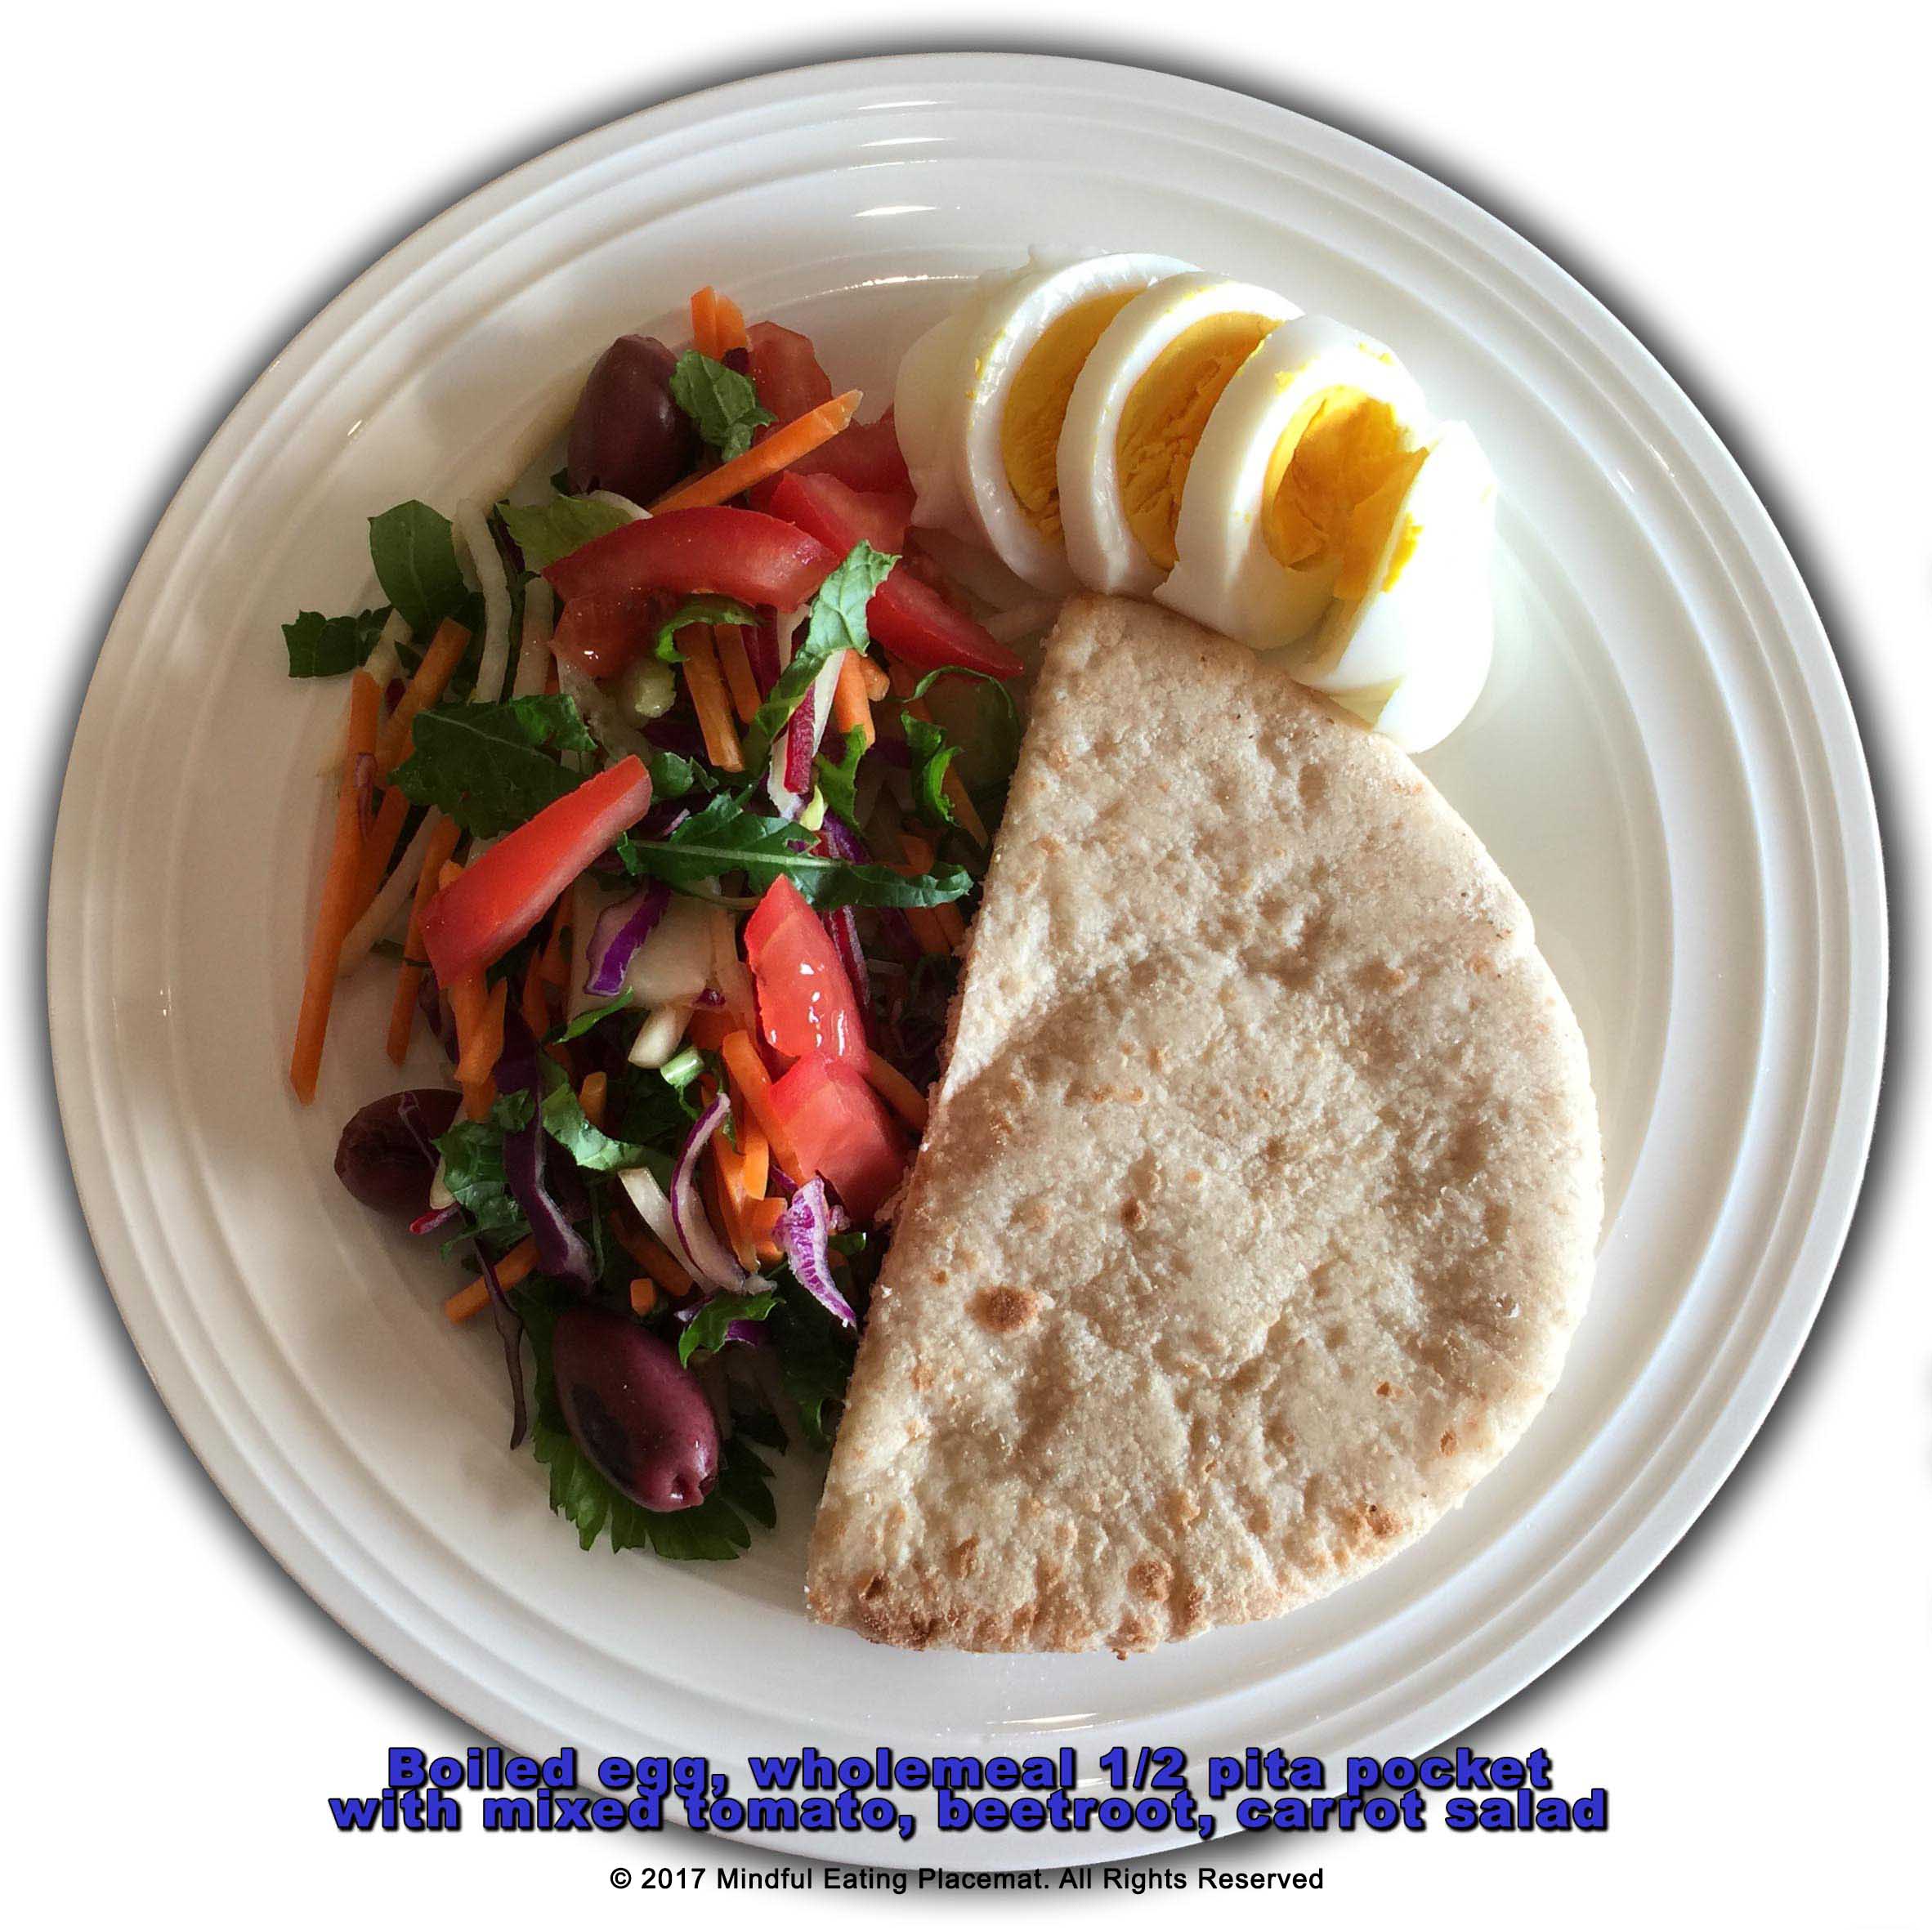 Boiled egg with half a wholemeal pita pocket with tomato, beetroot, carrot salad